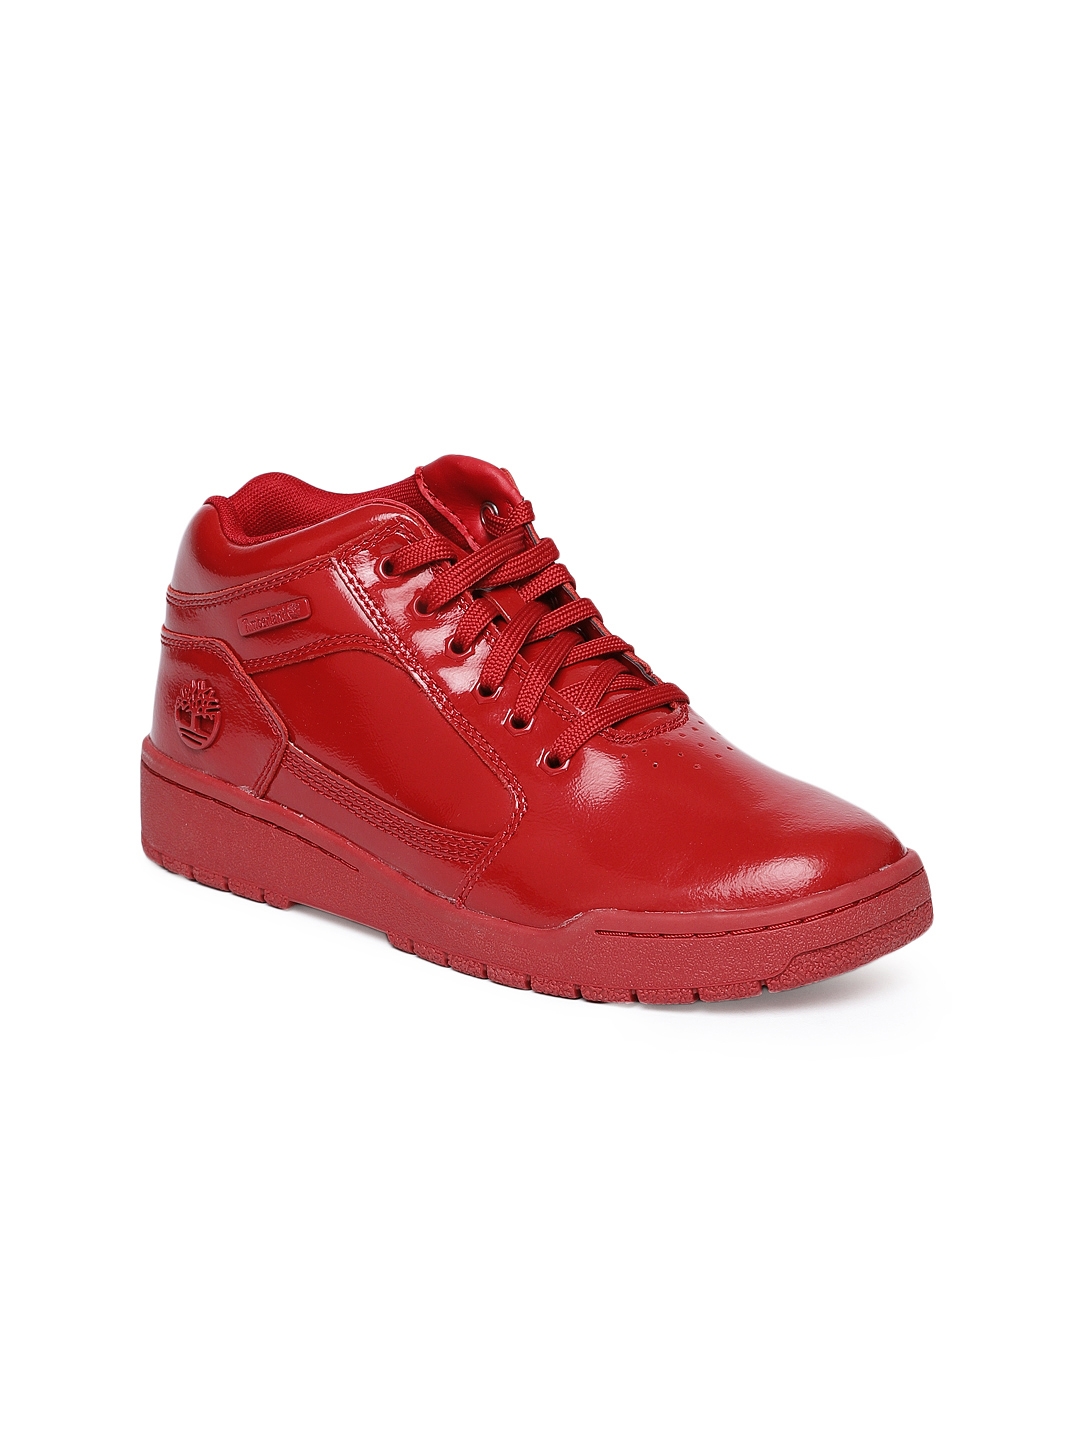 timberland red sneakers